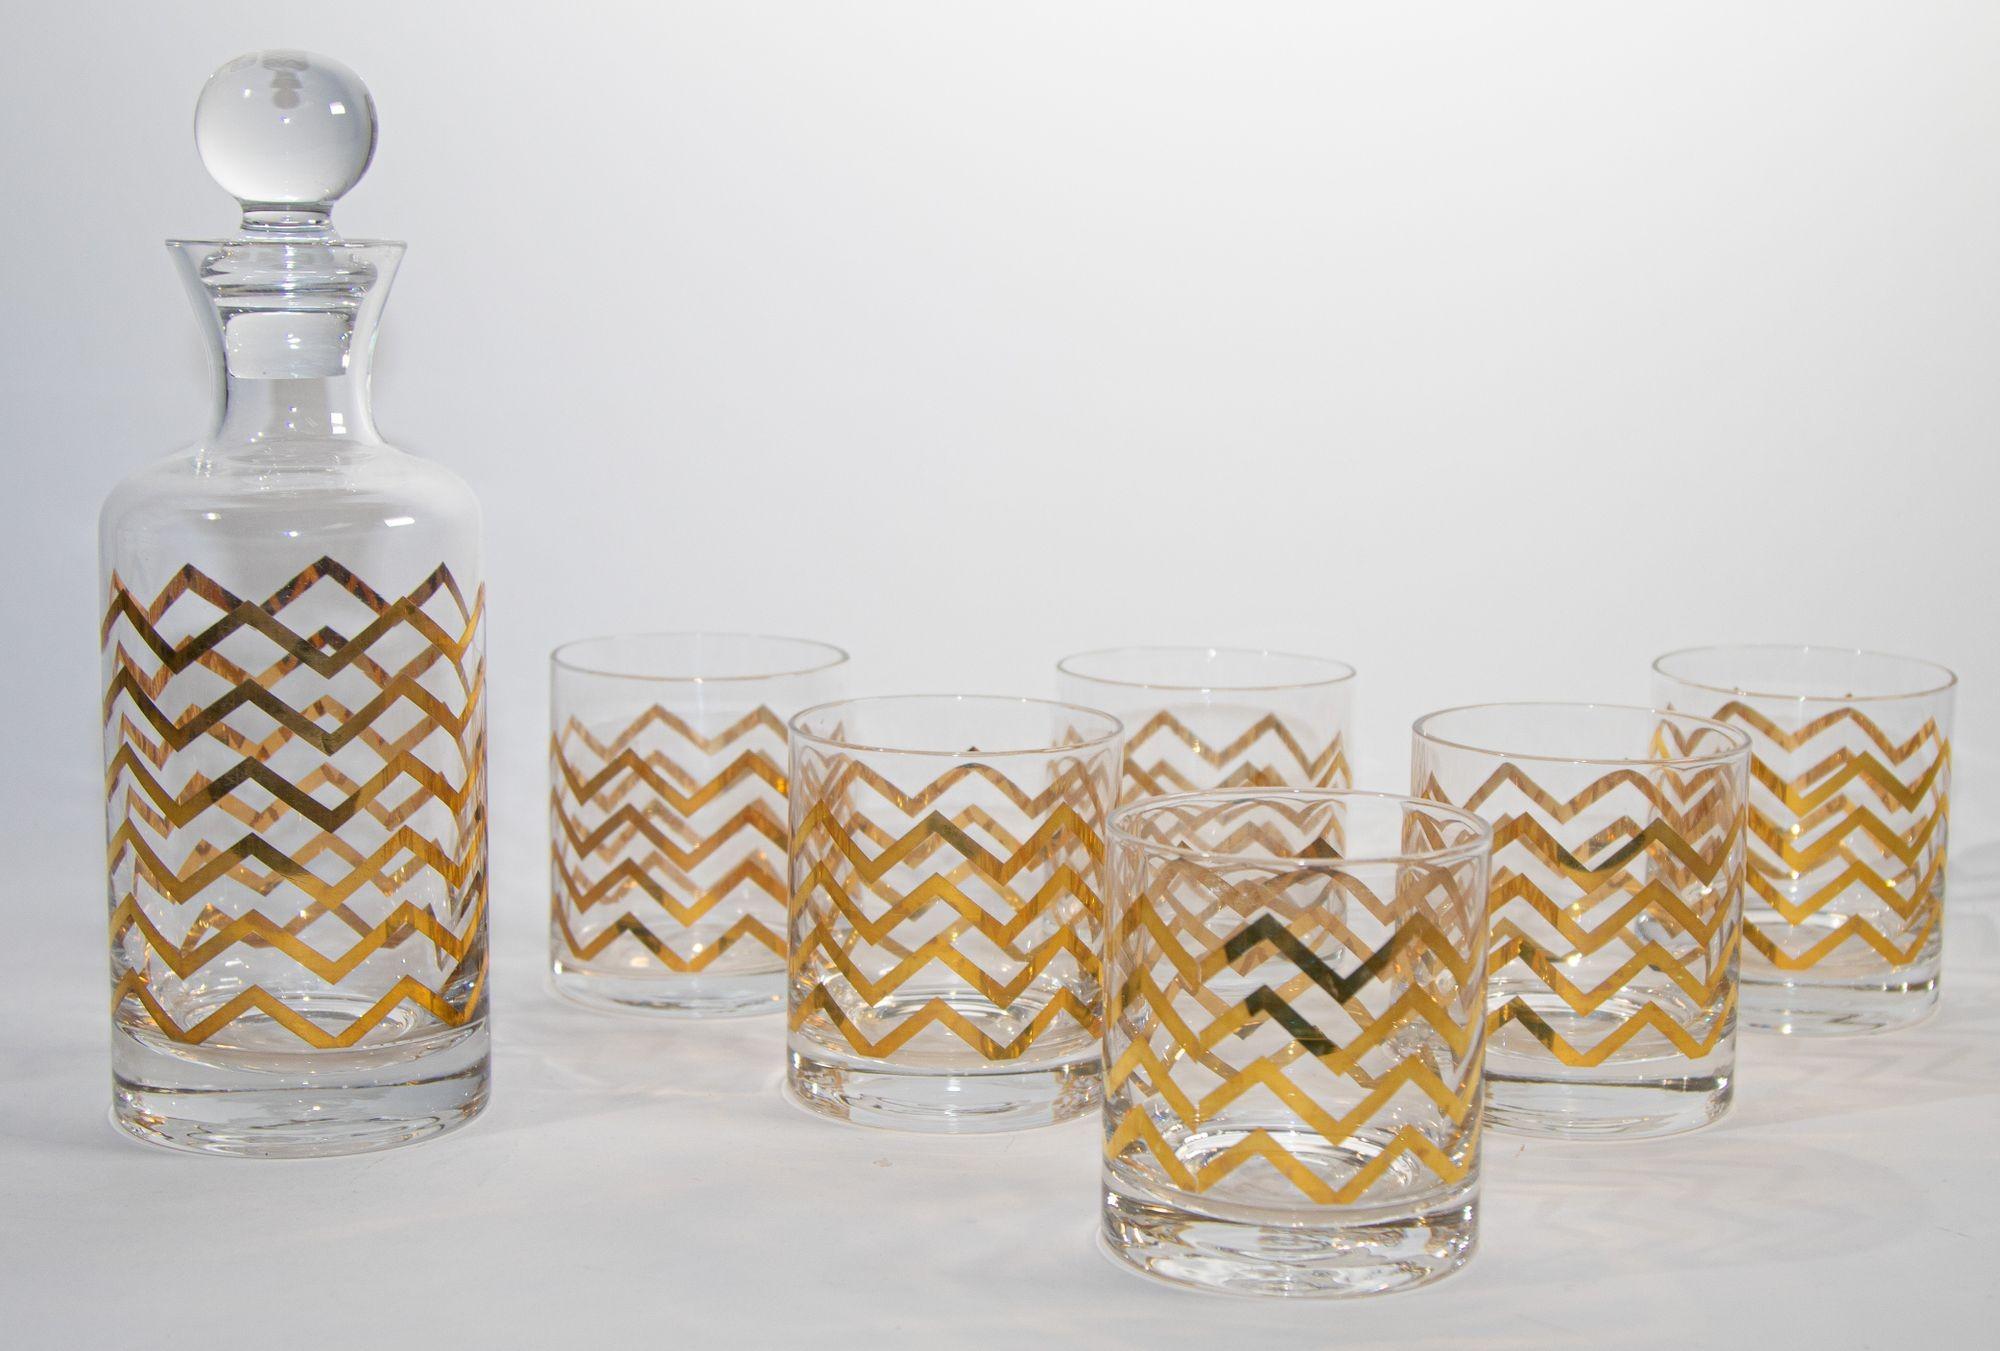 Vintage art deco cocktail style barware set adorned with thin bands of gold rings.
Cocktail cocktail double old fashioned glasses barware glasses and decanter.
Midcentury style barware set of 6 glasses and decanter.
Elegant exquisite vintage Art